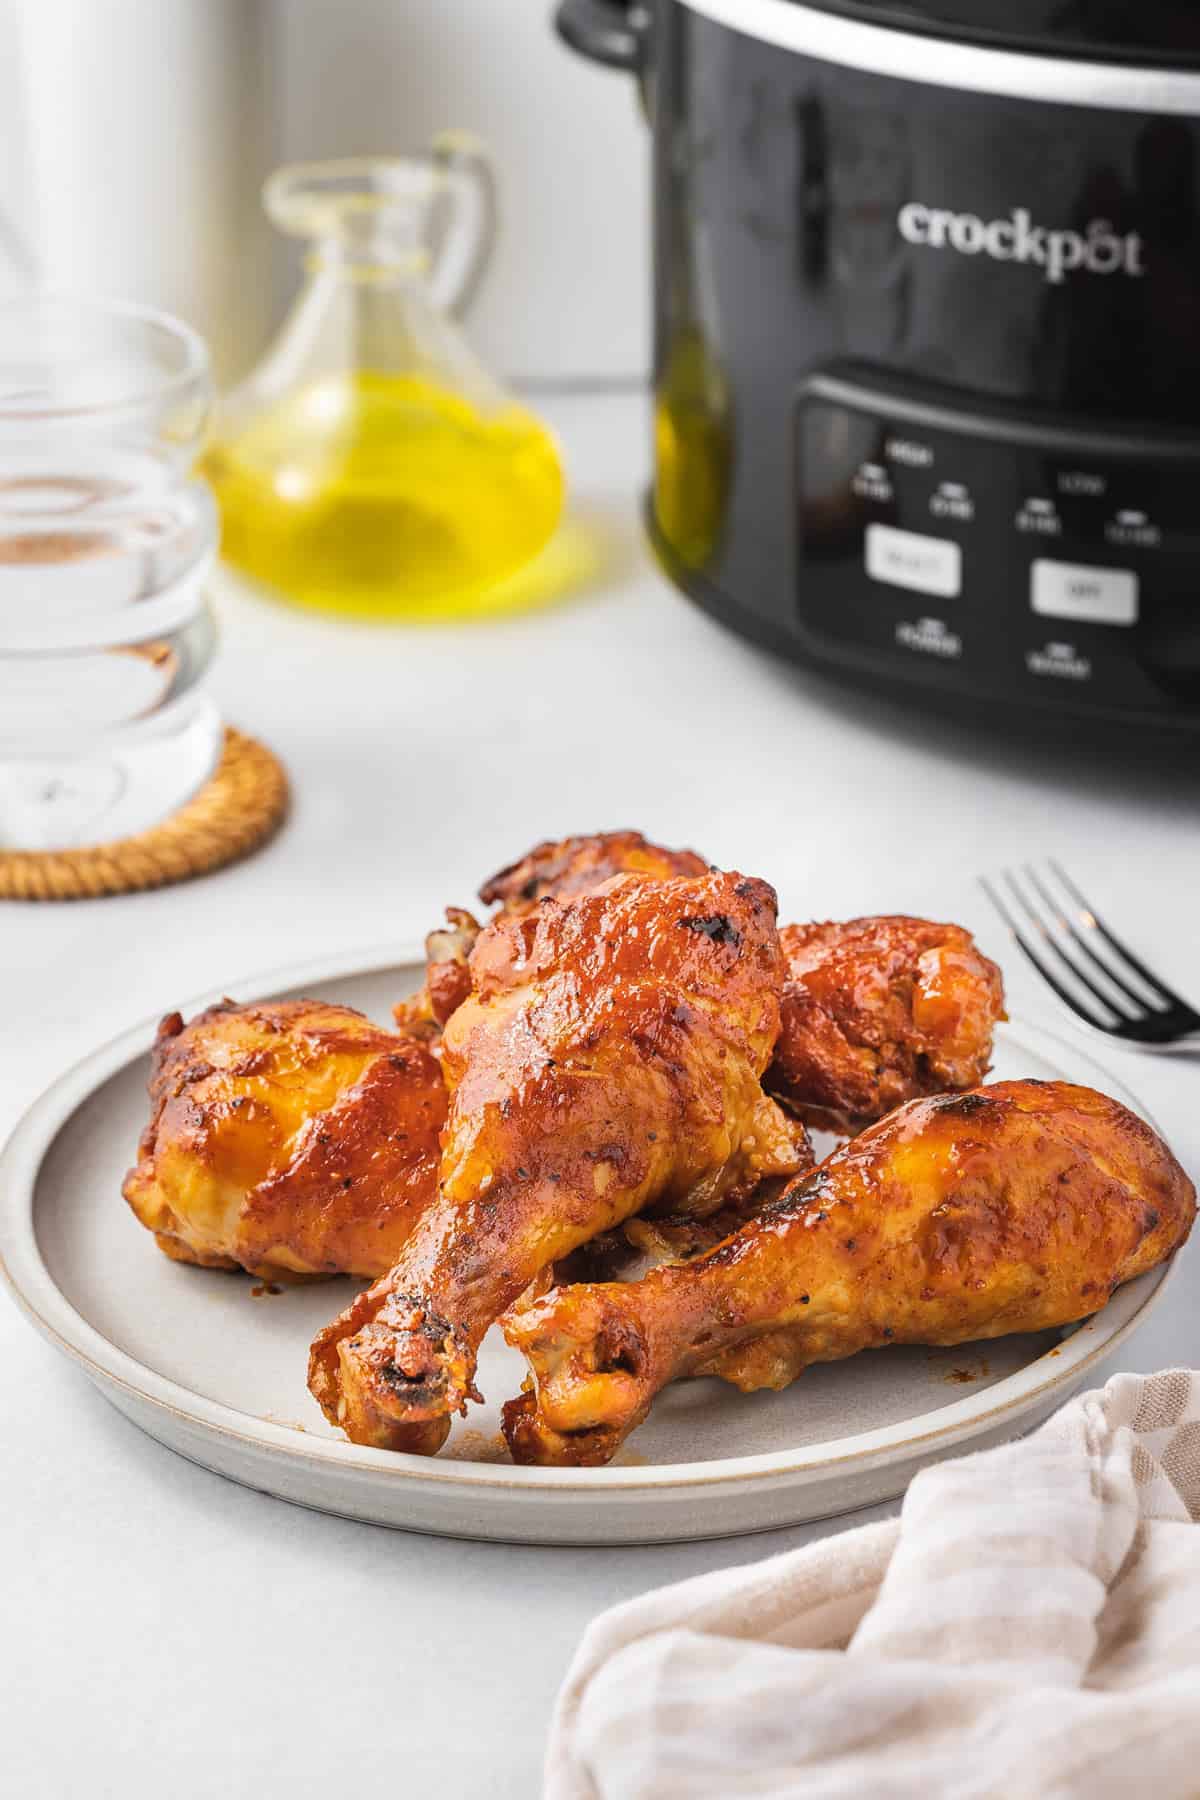 A plate of multiple slow cooker chicken drumsticks with a crockpot in the background.